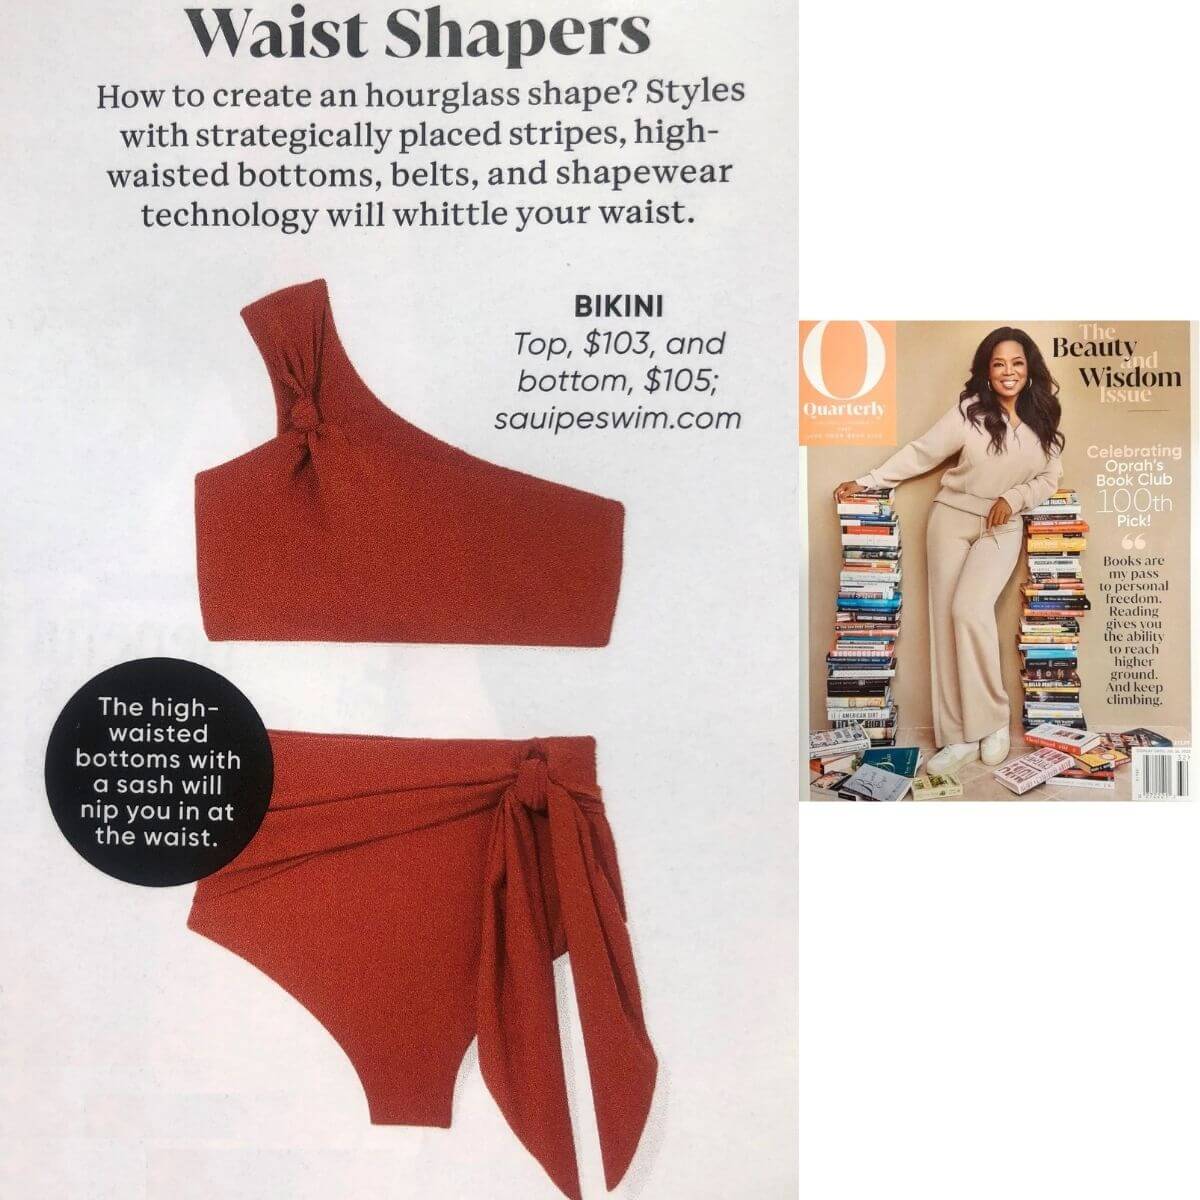 The Elle bikini is featured on Oprah magazine, noted as their top choice waist shaper. 